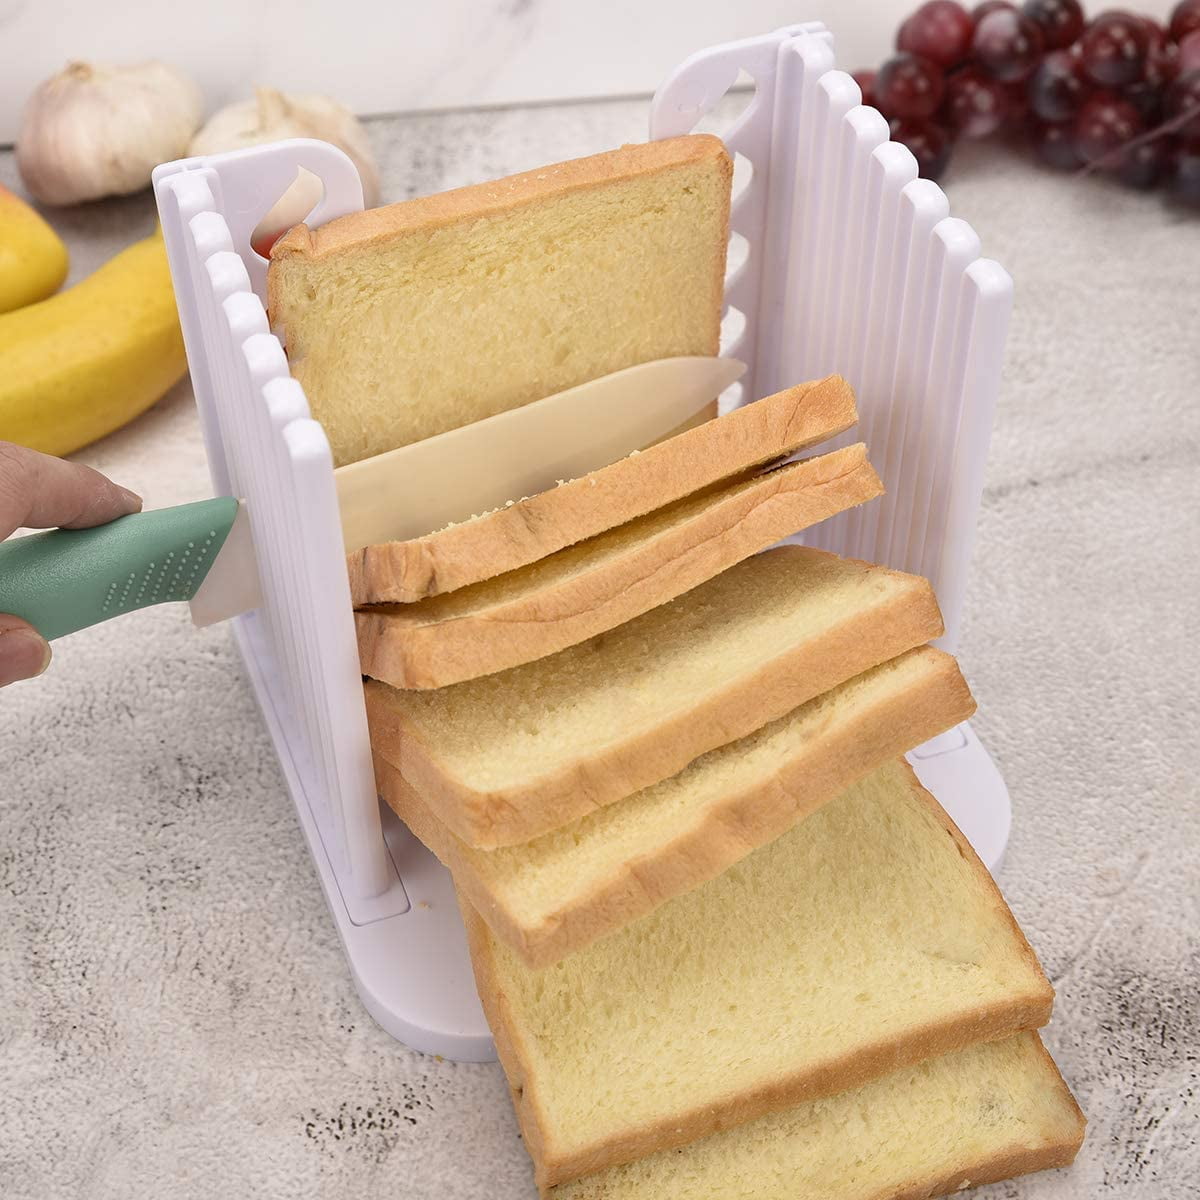 Brown Generies Bread Slicer for Homemade Bread Adjustable Foldable Bread Toast Bagel Sandwich Cutting Guide Machine with 4 Slice Thicknesses Mold 